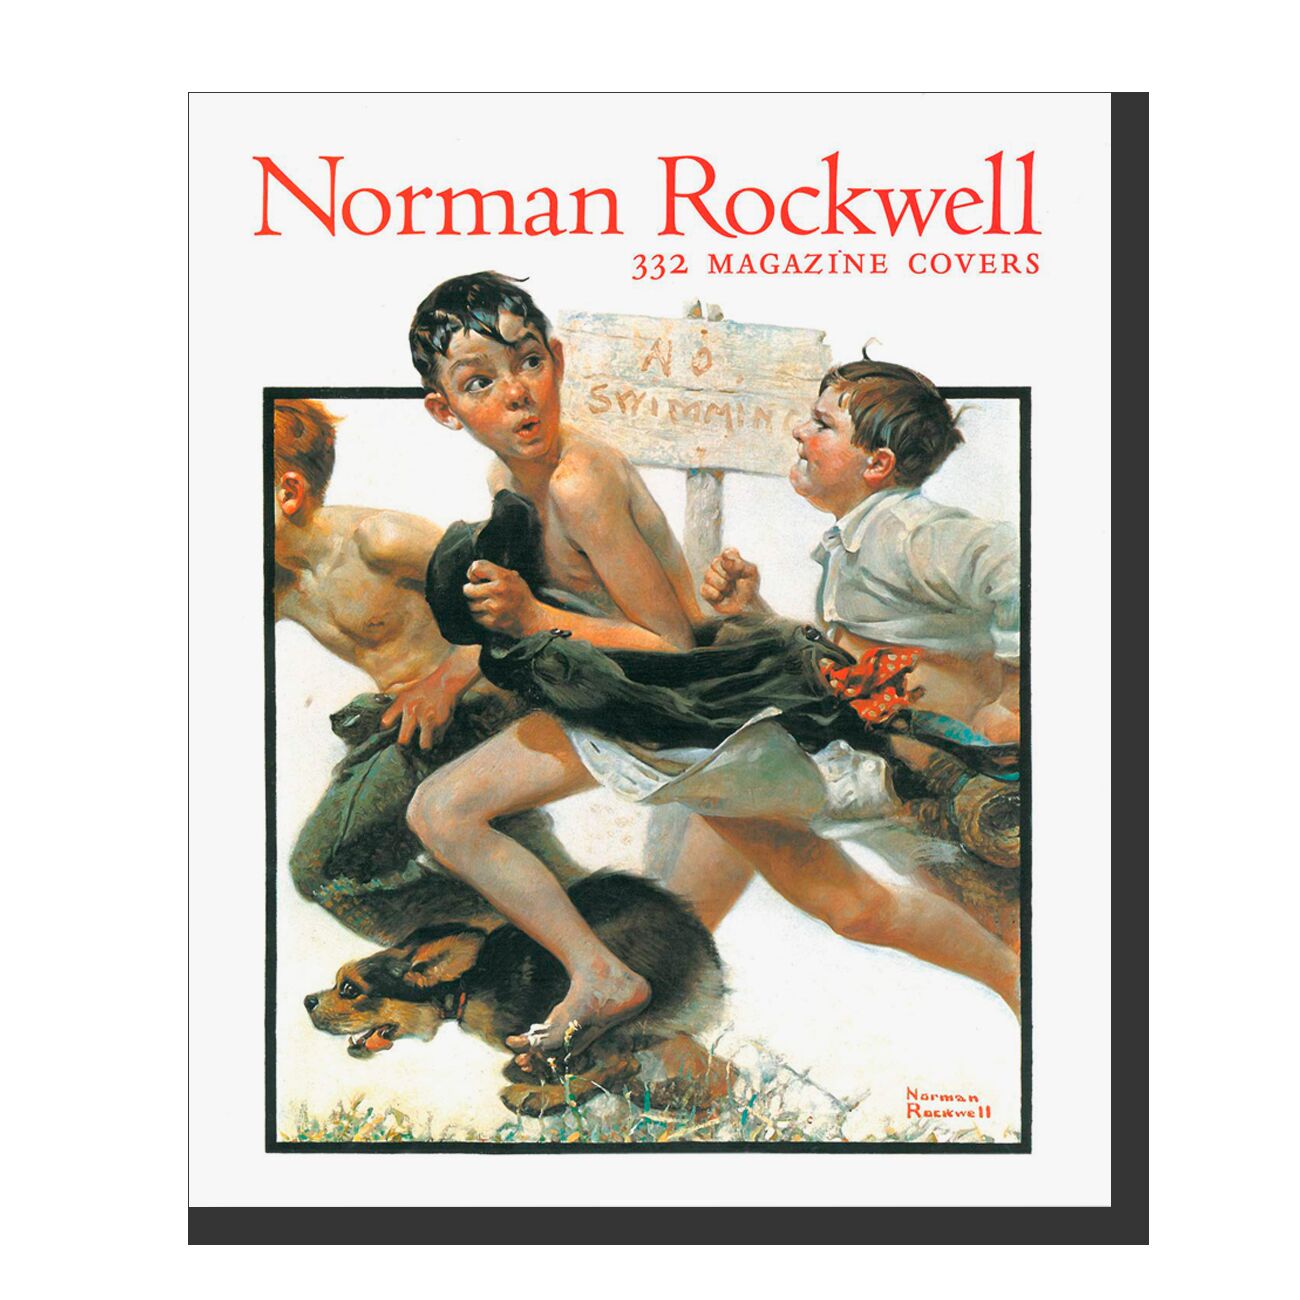 Norman Rockwell: 332 Magazine covers